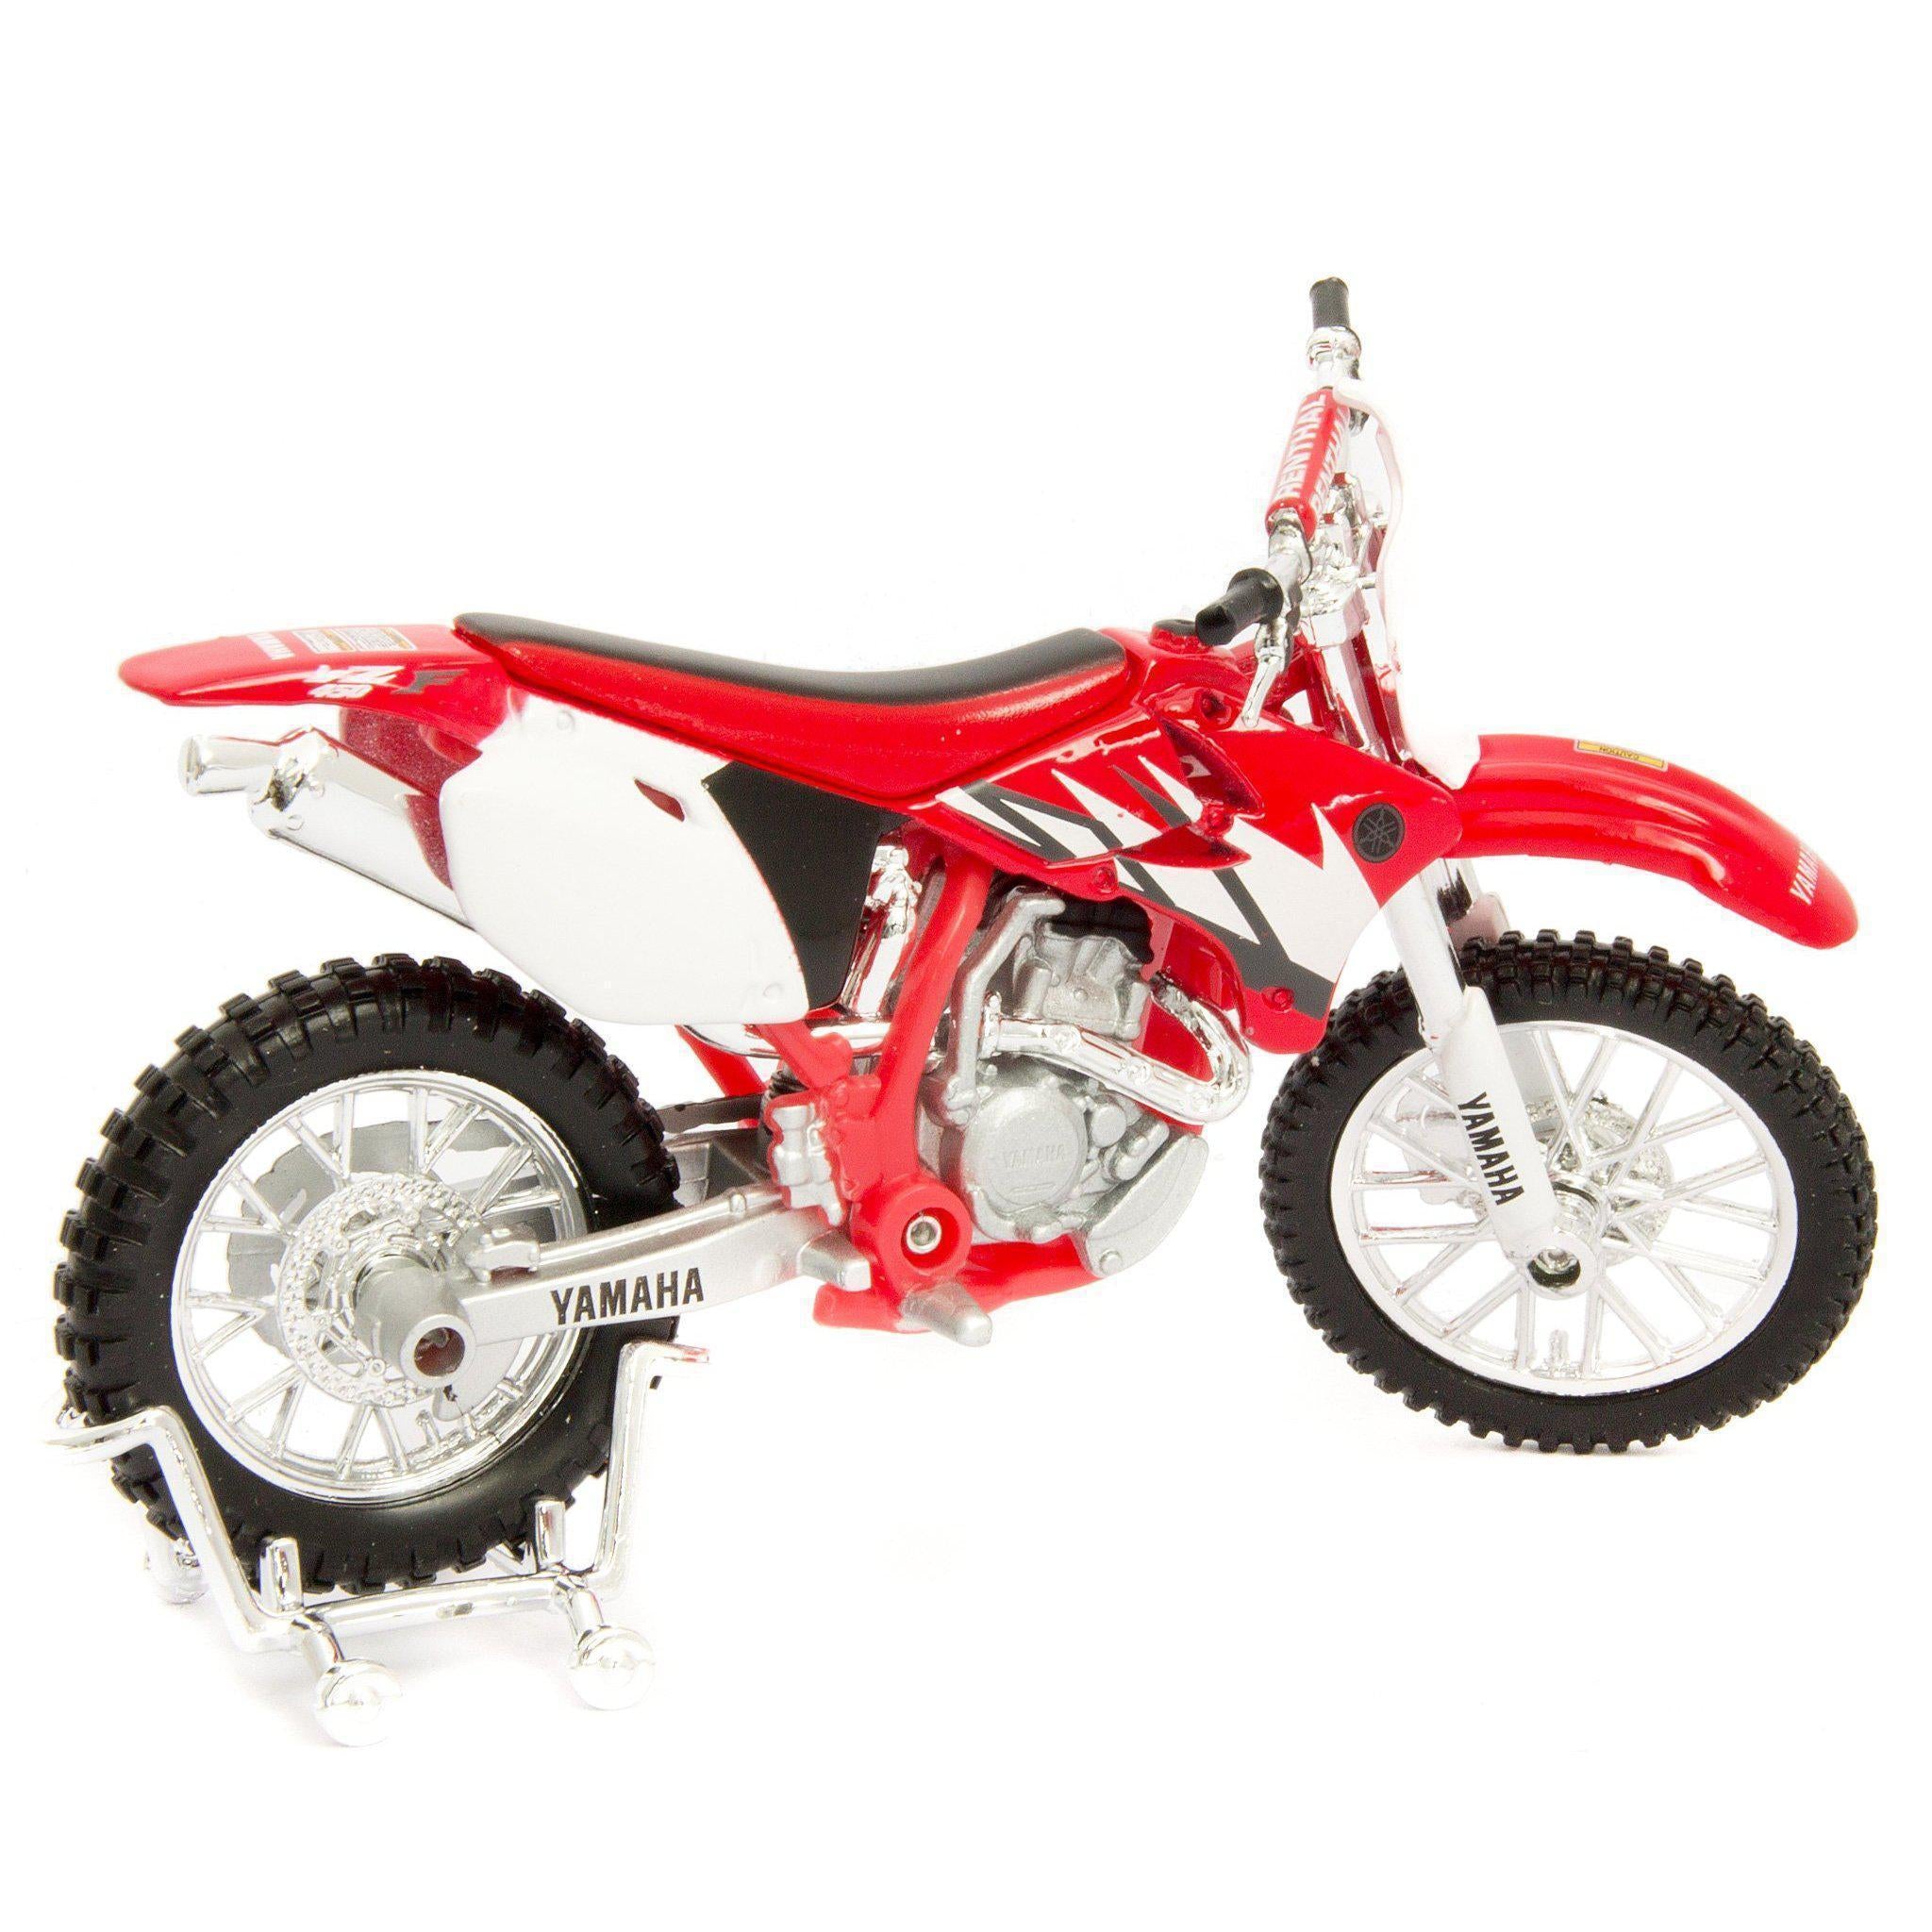 Yamaha YZ-450F Diecast Model Motorcycle red - 1:18 Scale-Maisto-Diecast Model Centre